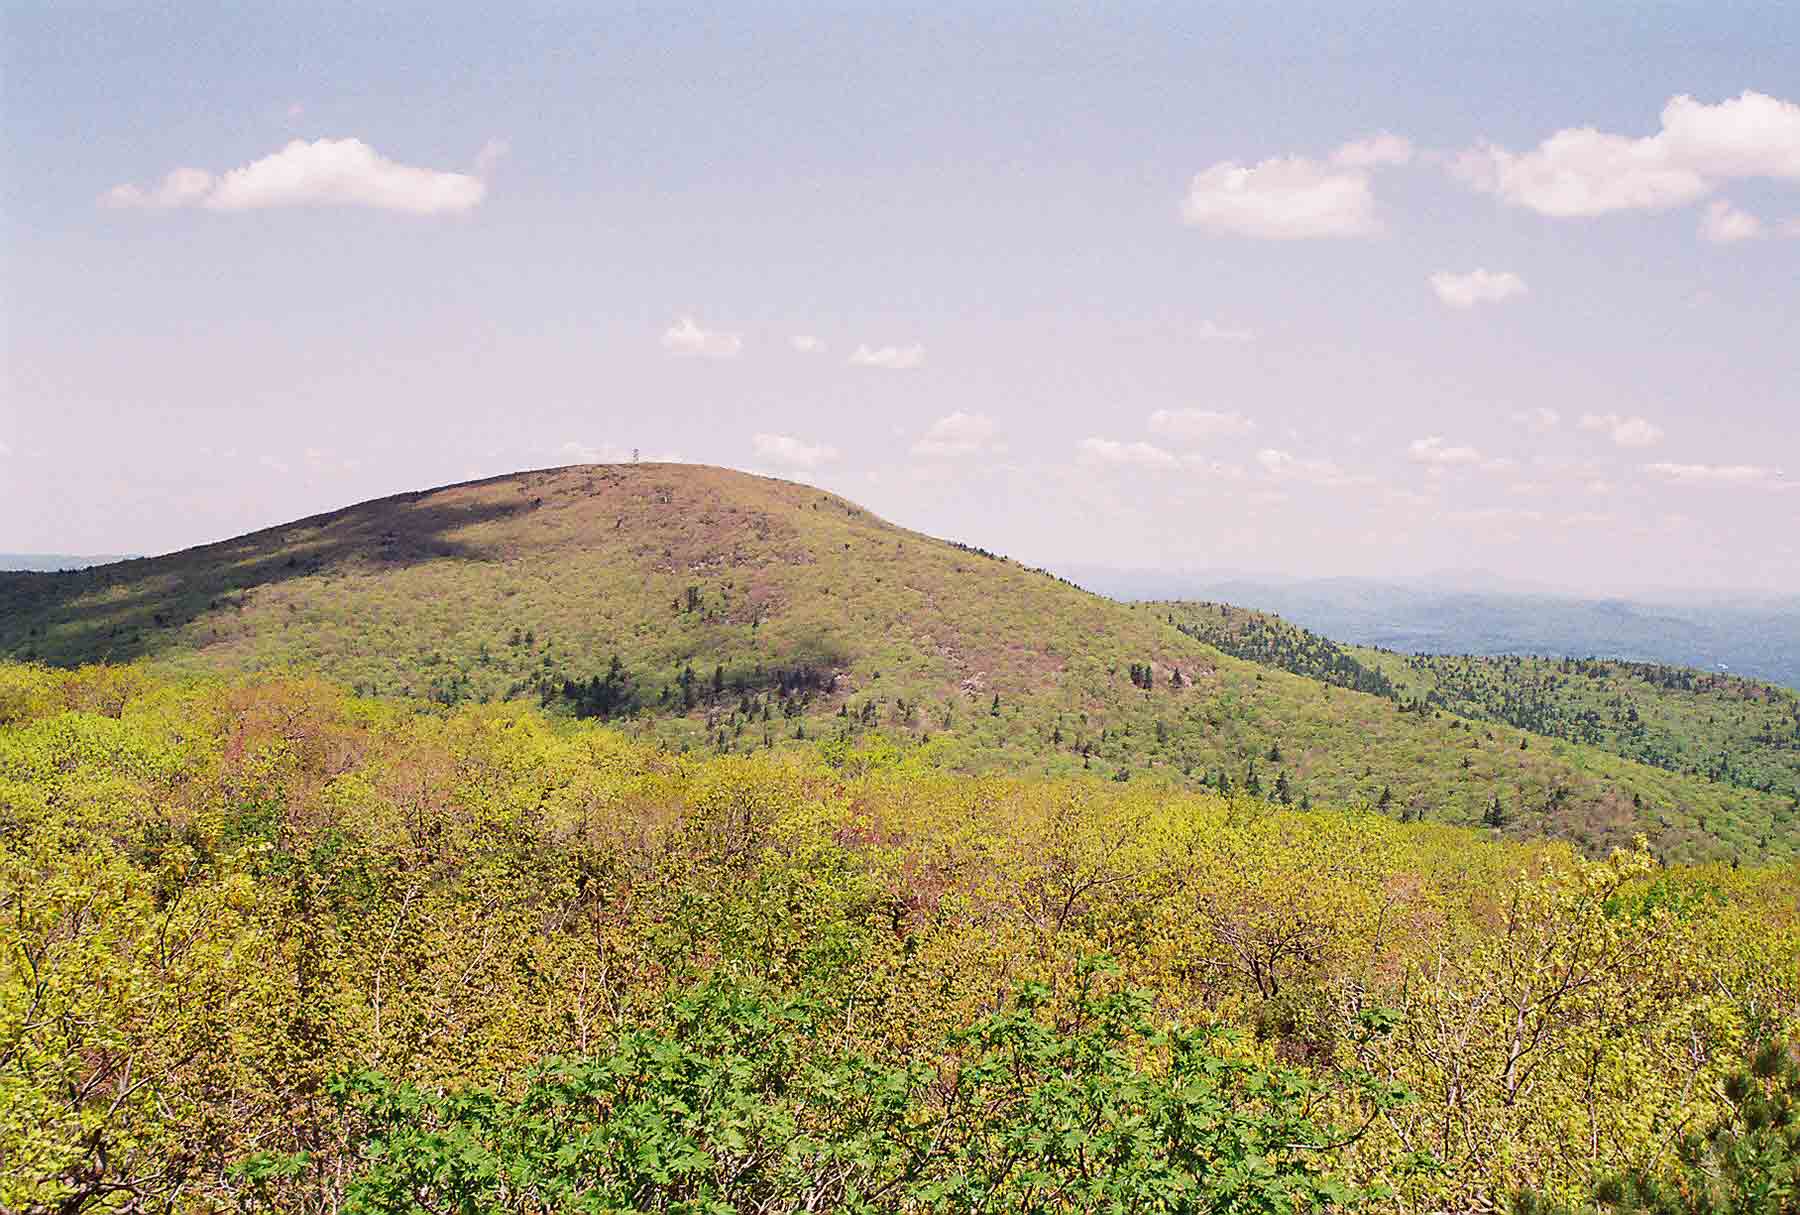 View north to the summit of Mt. Everett from the north side of Race Mt. Taken at approximately mm 6.3.  Courtesy dlcul@conncoll.edu